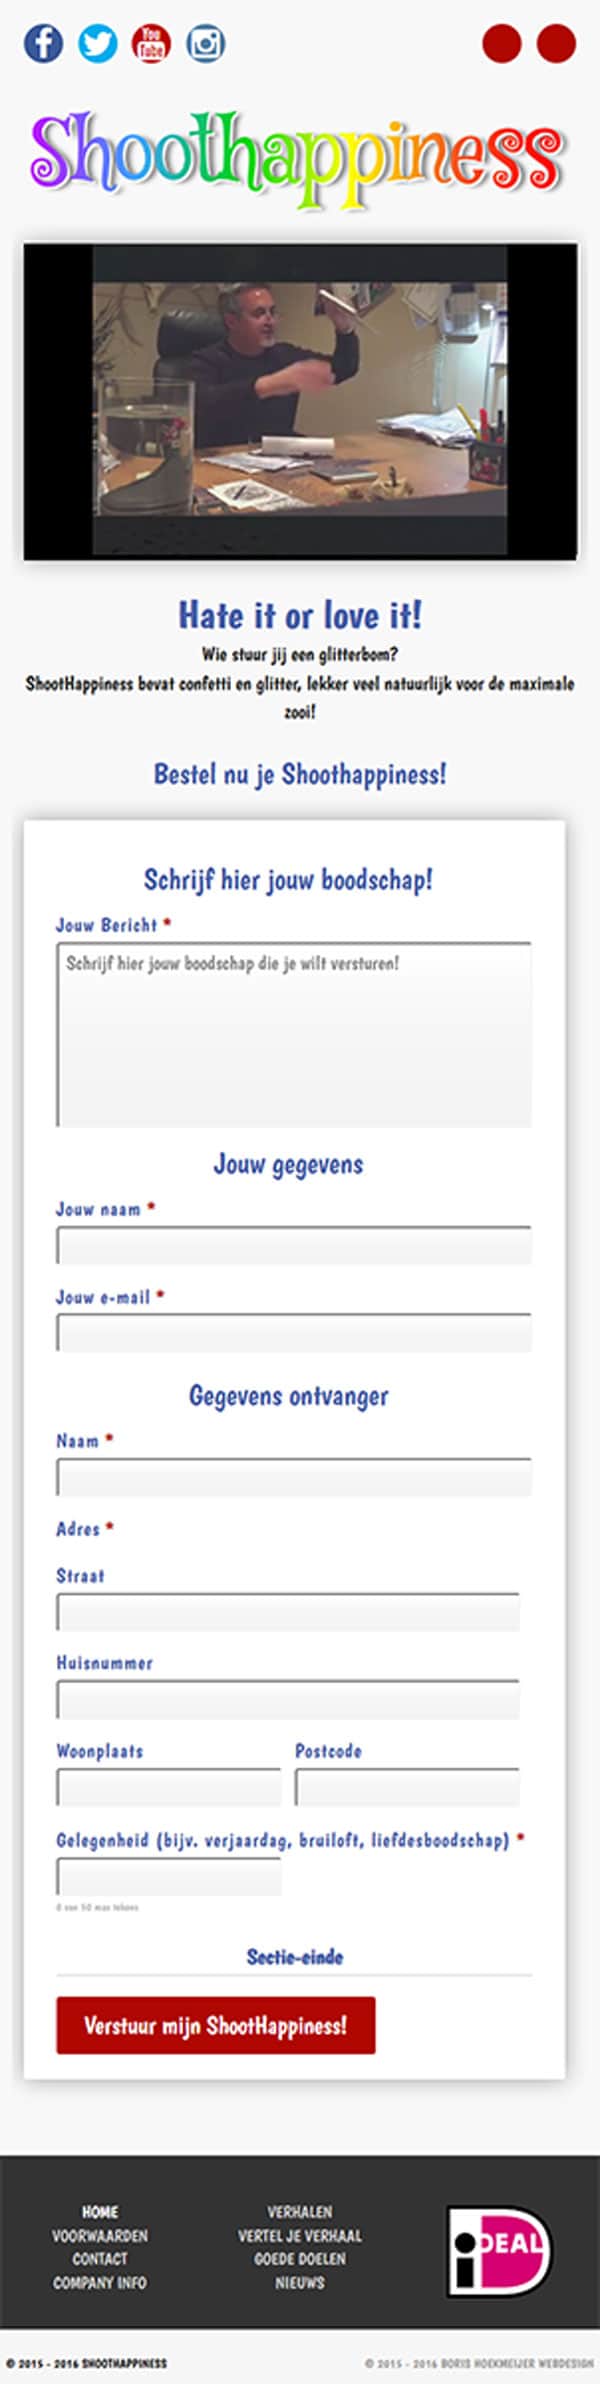 website ontwerp shoothappiness homepage mobile